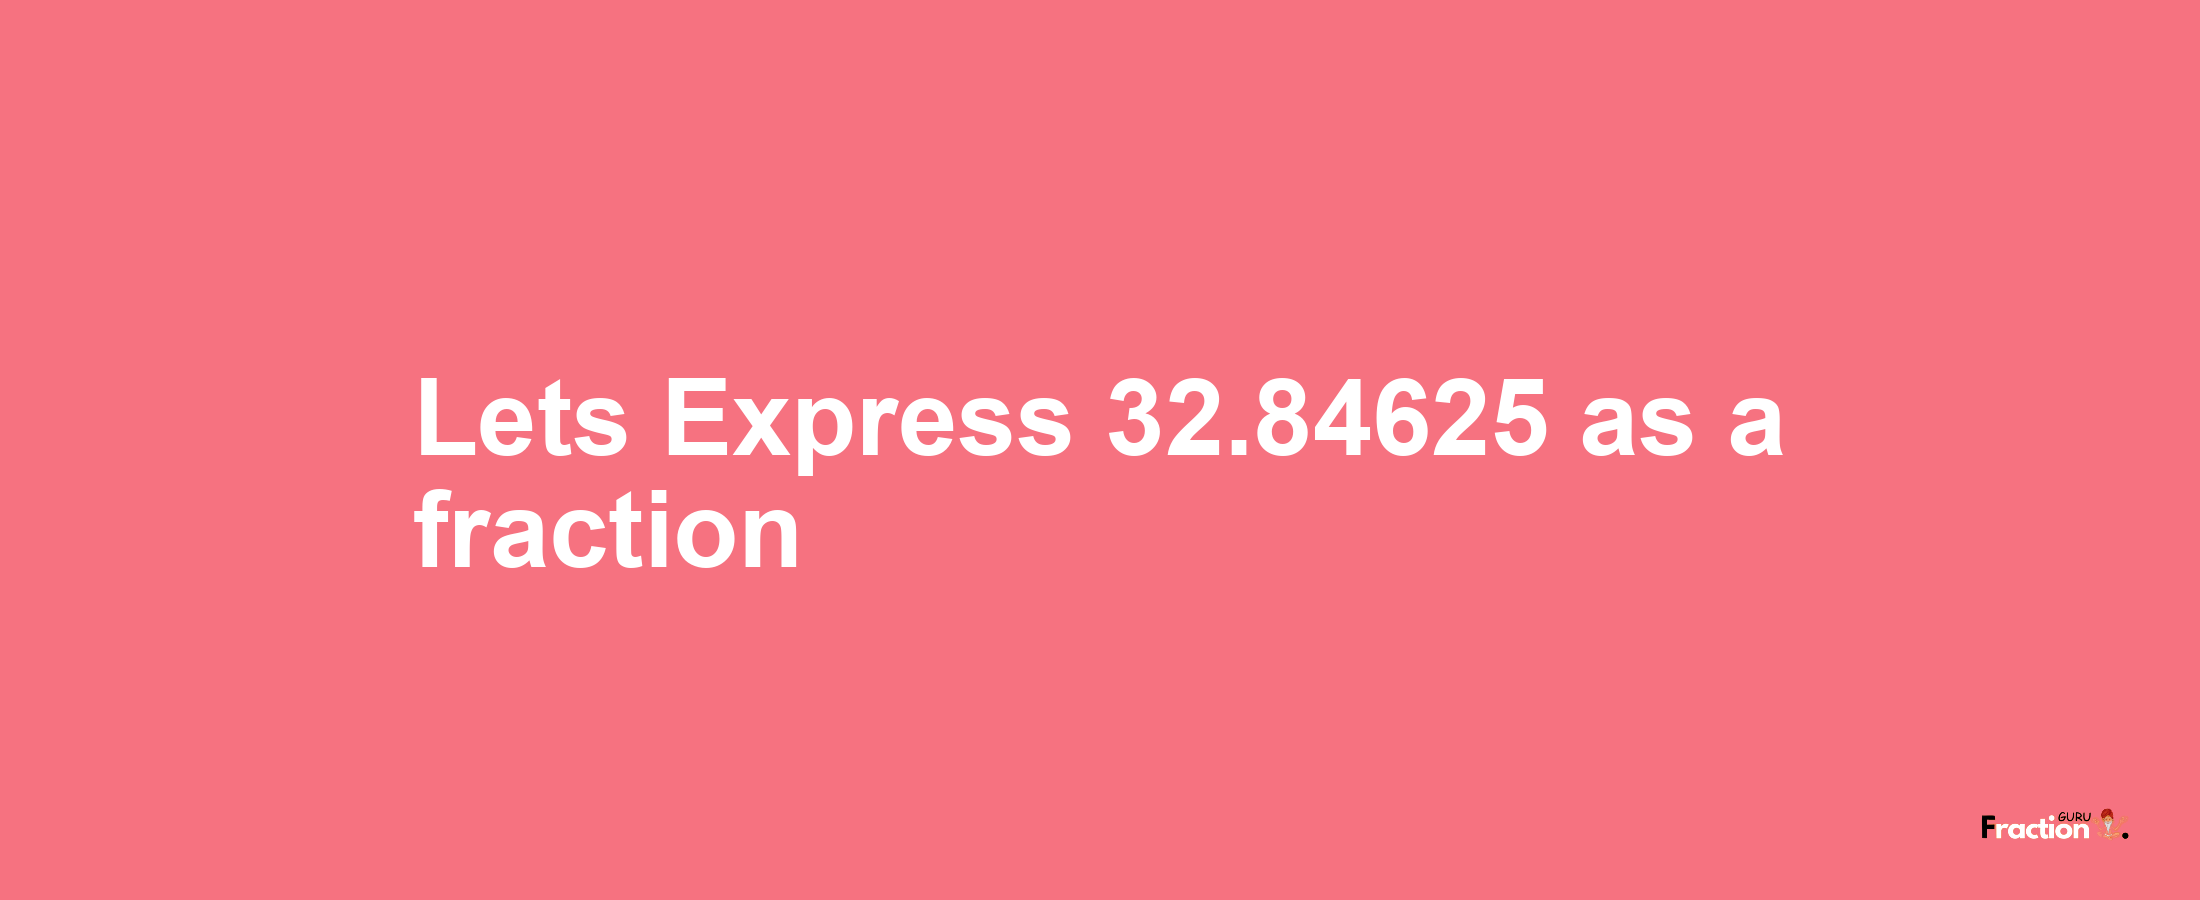 Lets Express 32.84625 as afraction